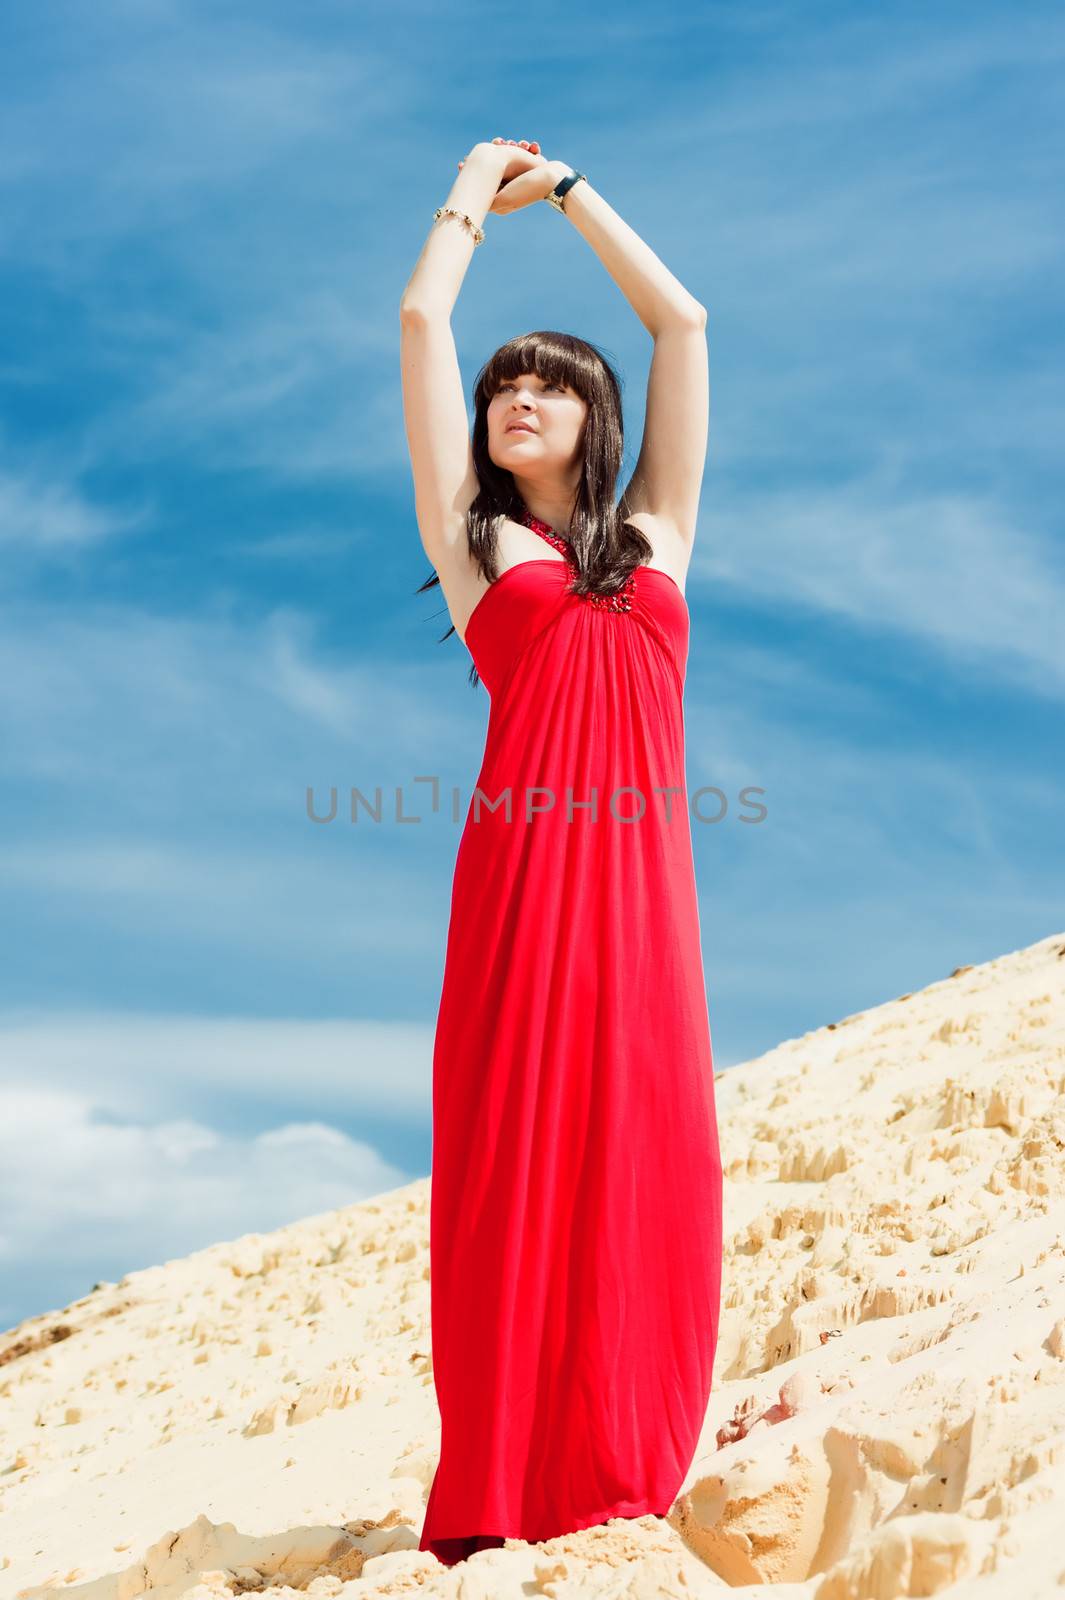 A girl in a red dress posing on a sand dune by kosmsos111